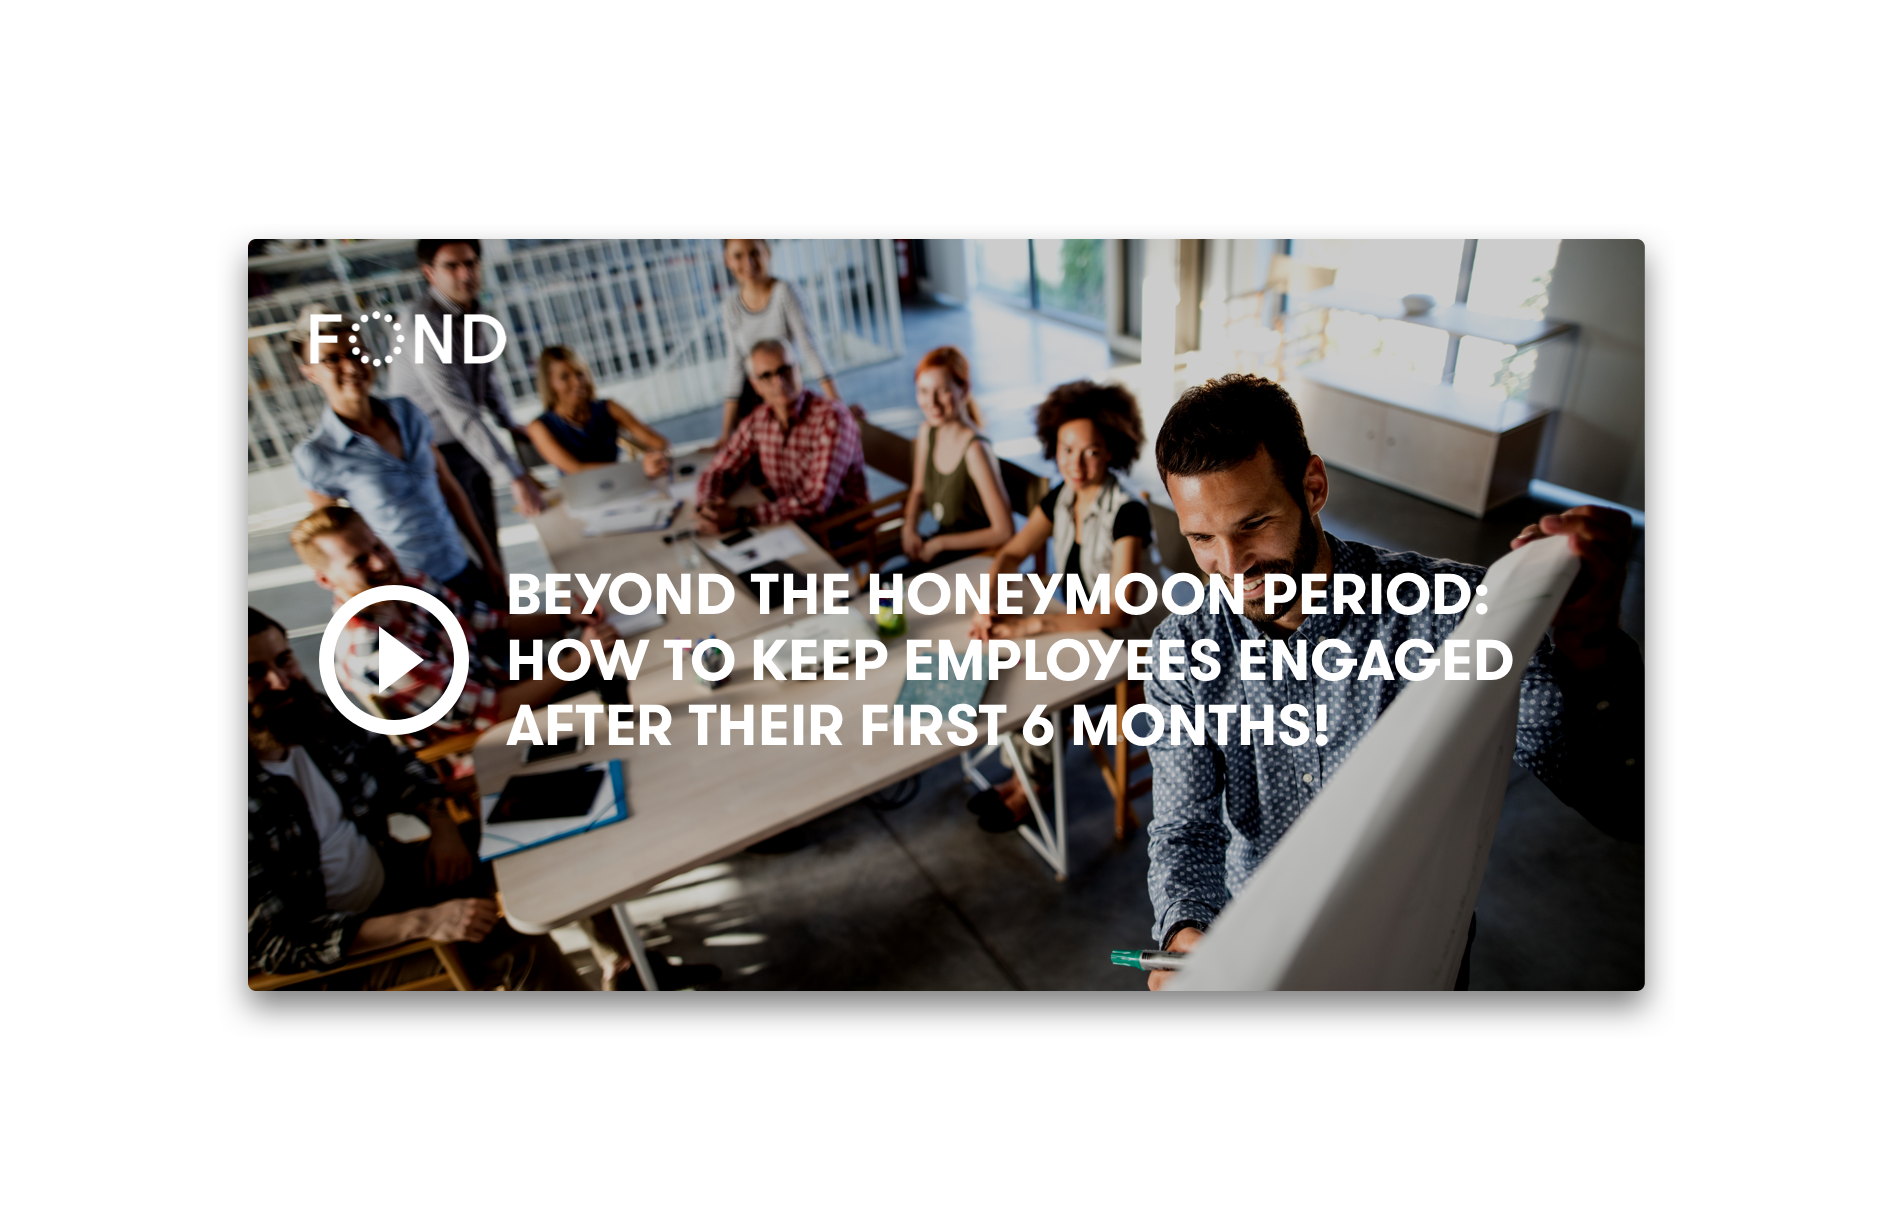 Beyond the Honeymoon Period: How to Keep Employees Engaged after Their First 6 Months!